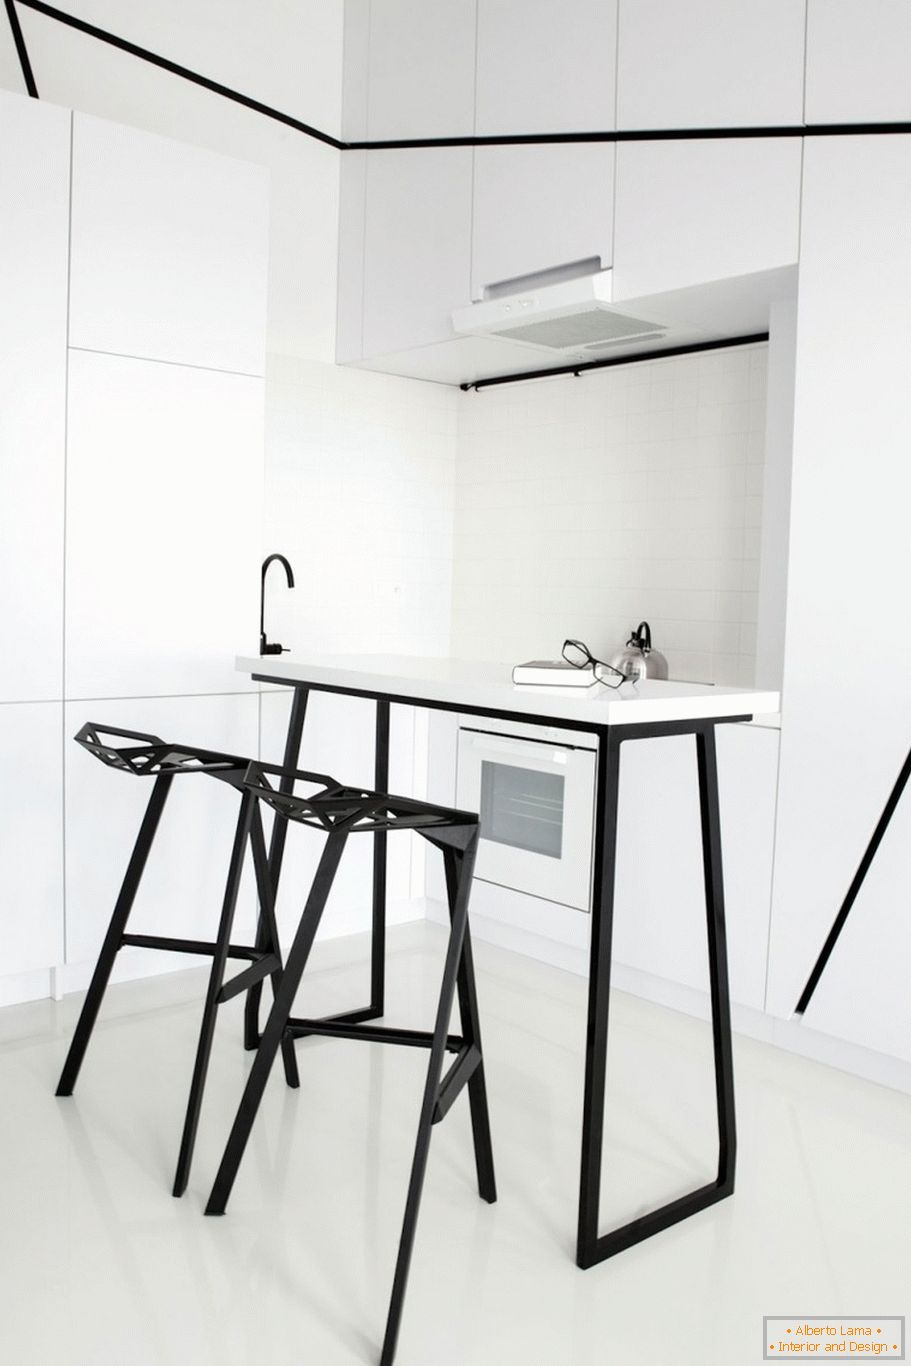 Design of the kitchen area in the interior of studio apartment Peter's Flat